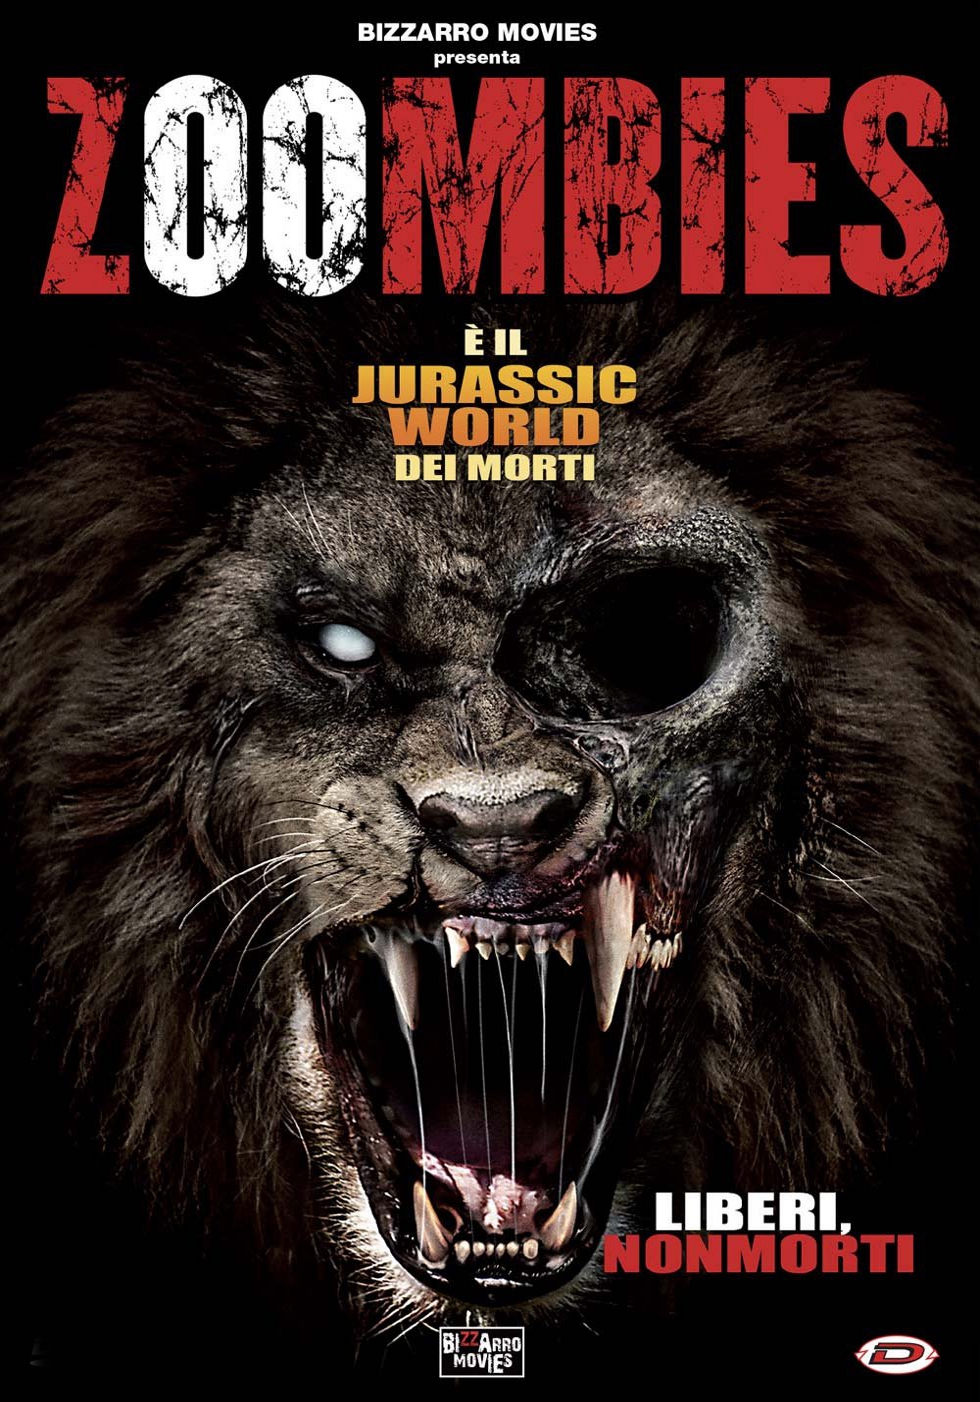 Zoombies [HD] (2016)